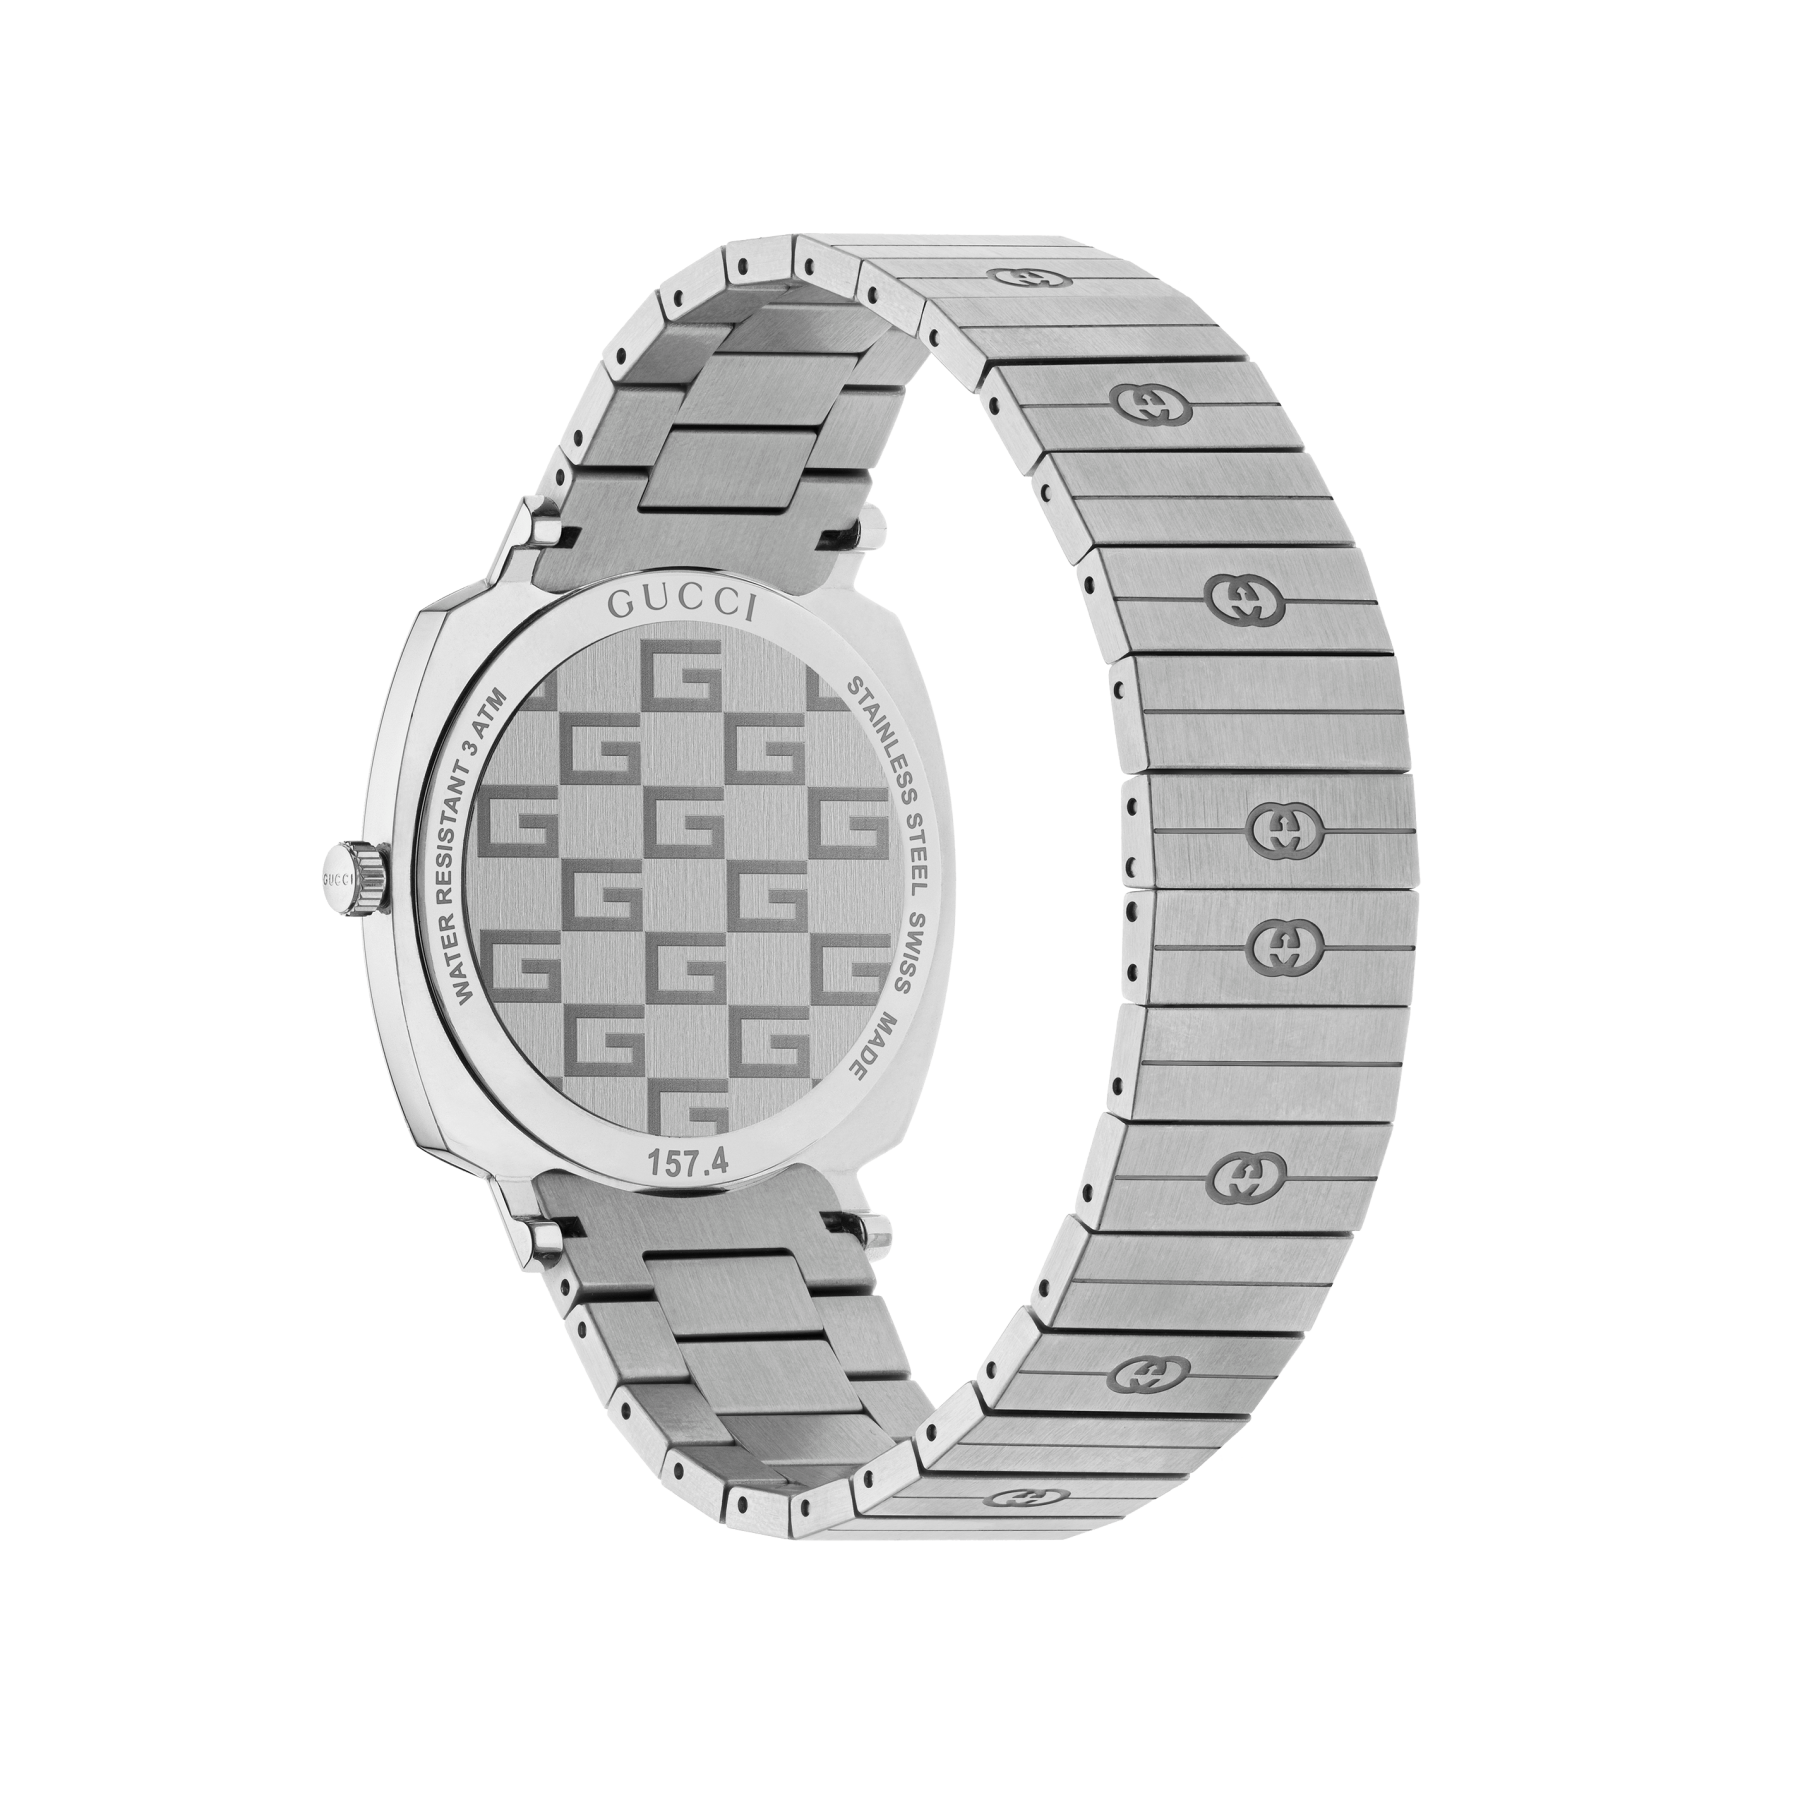 Gucci Grip Stainless Steel Watch – 38mm back view